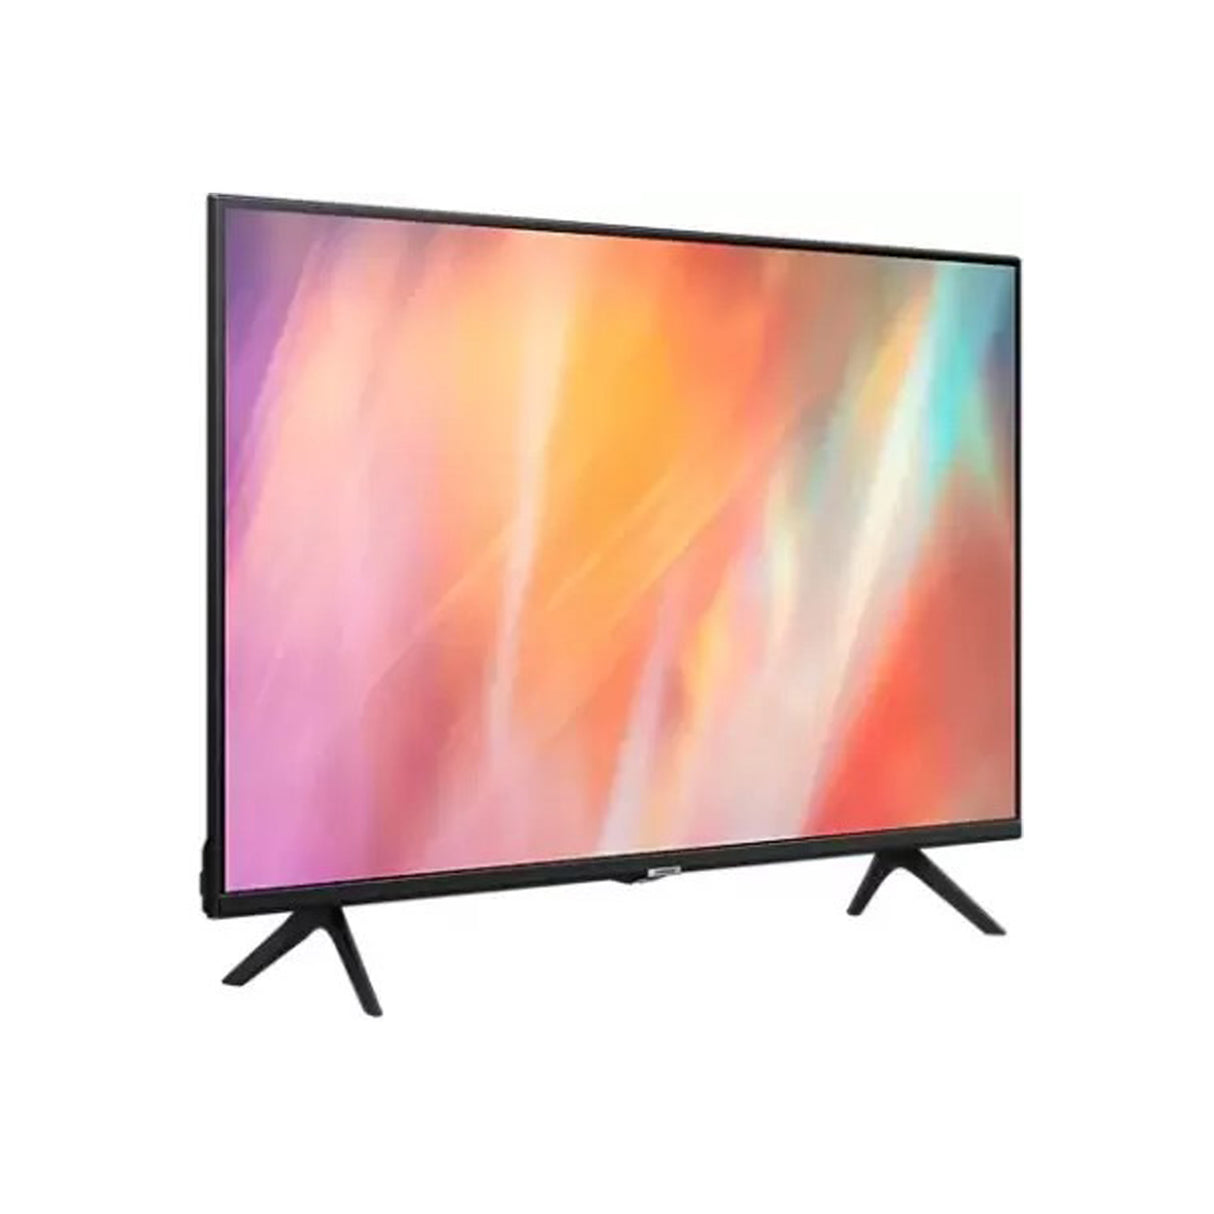 Upgrade with Samsung's 43-inch 4K Smart LED TV – modern home appliance.